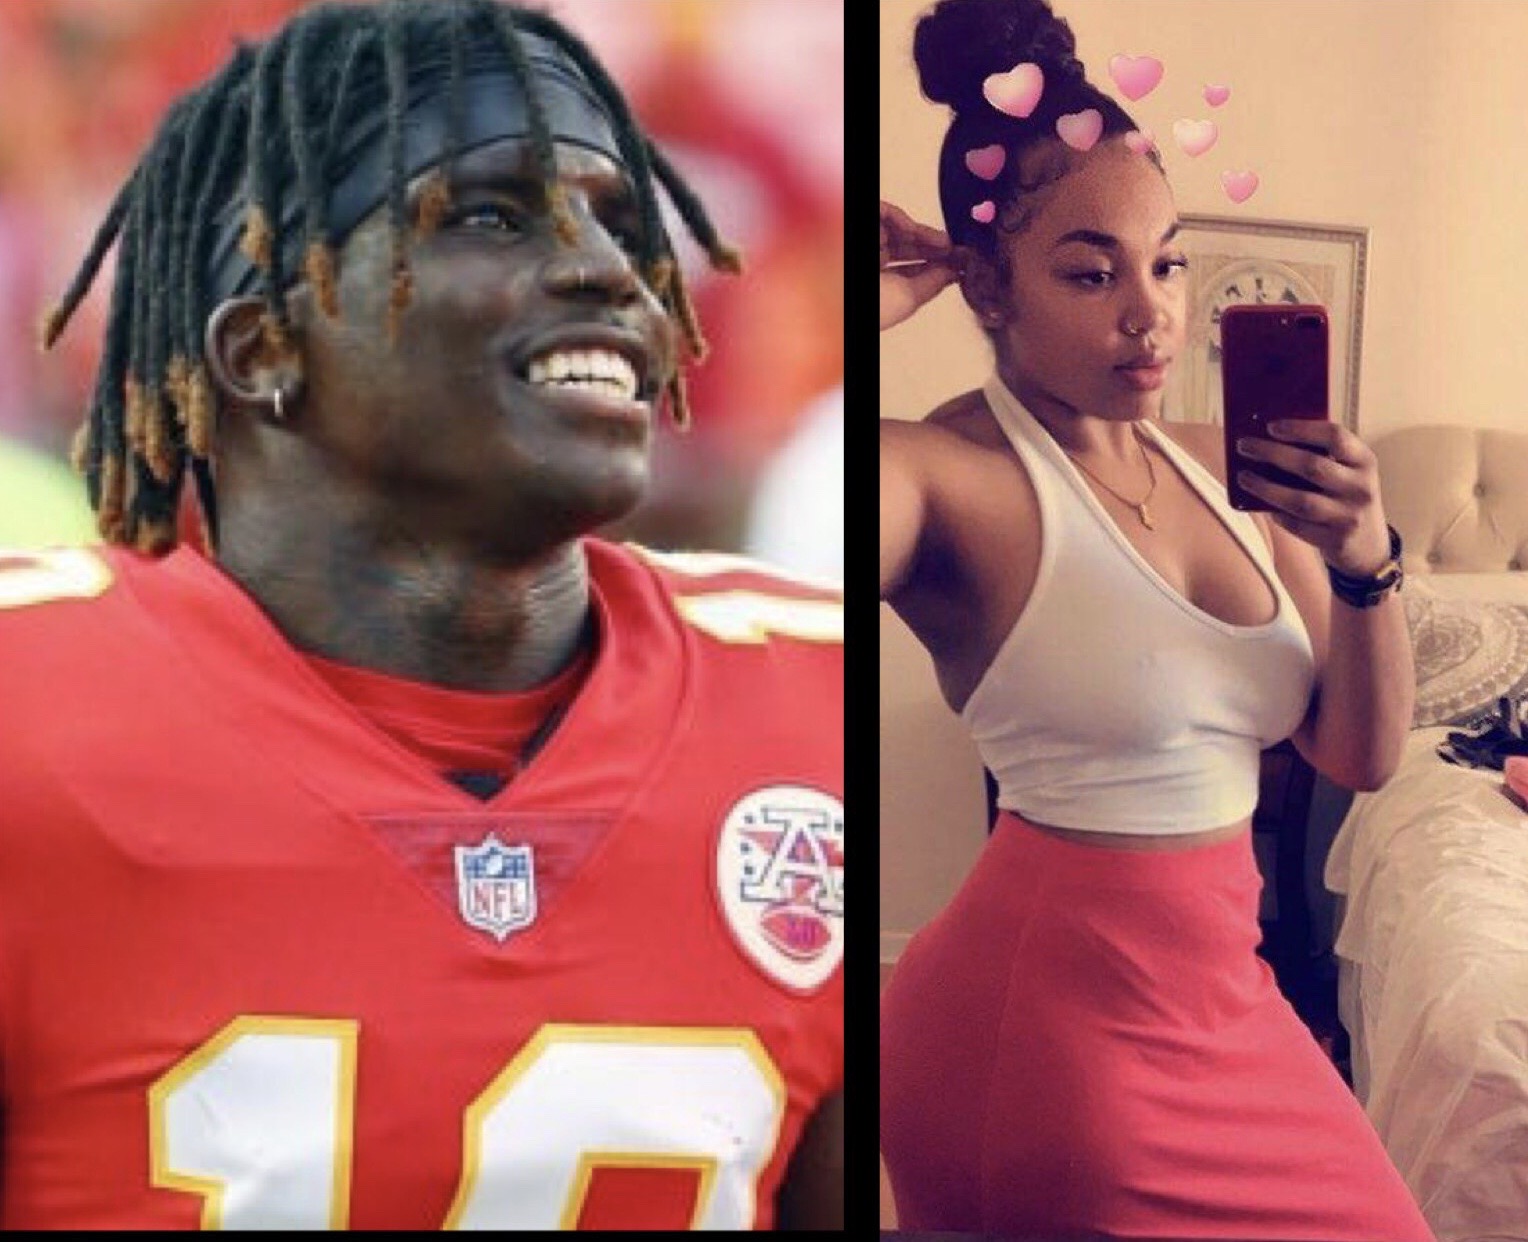 How Tyreek Hill Went Public With His New Ig Model Girlfriend During Soccer Match After Breaking 